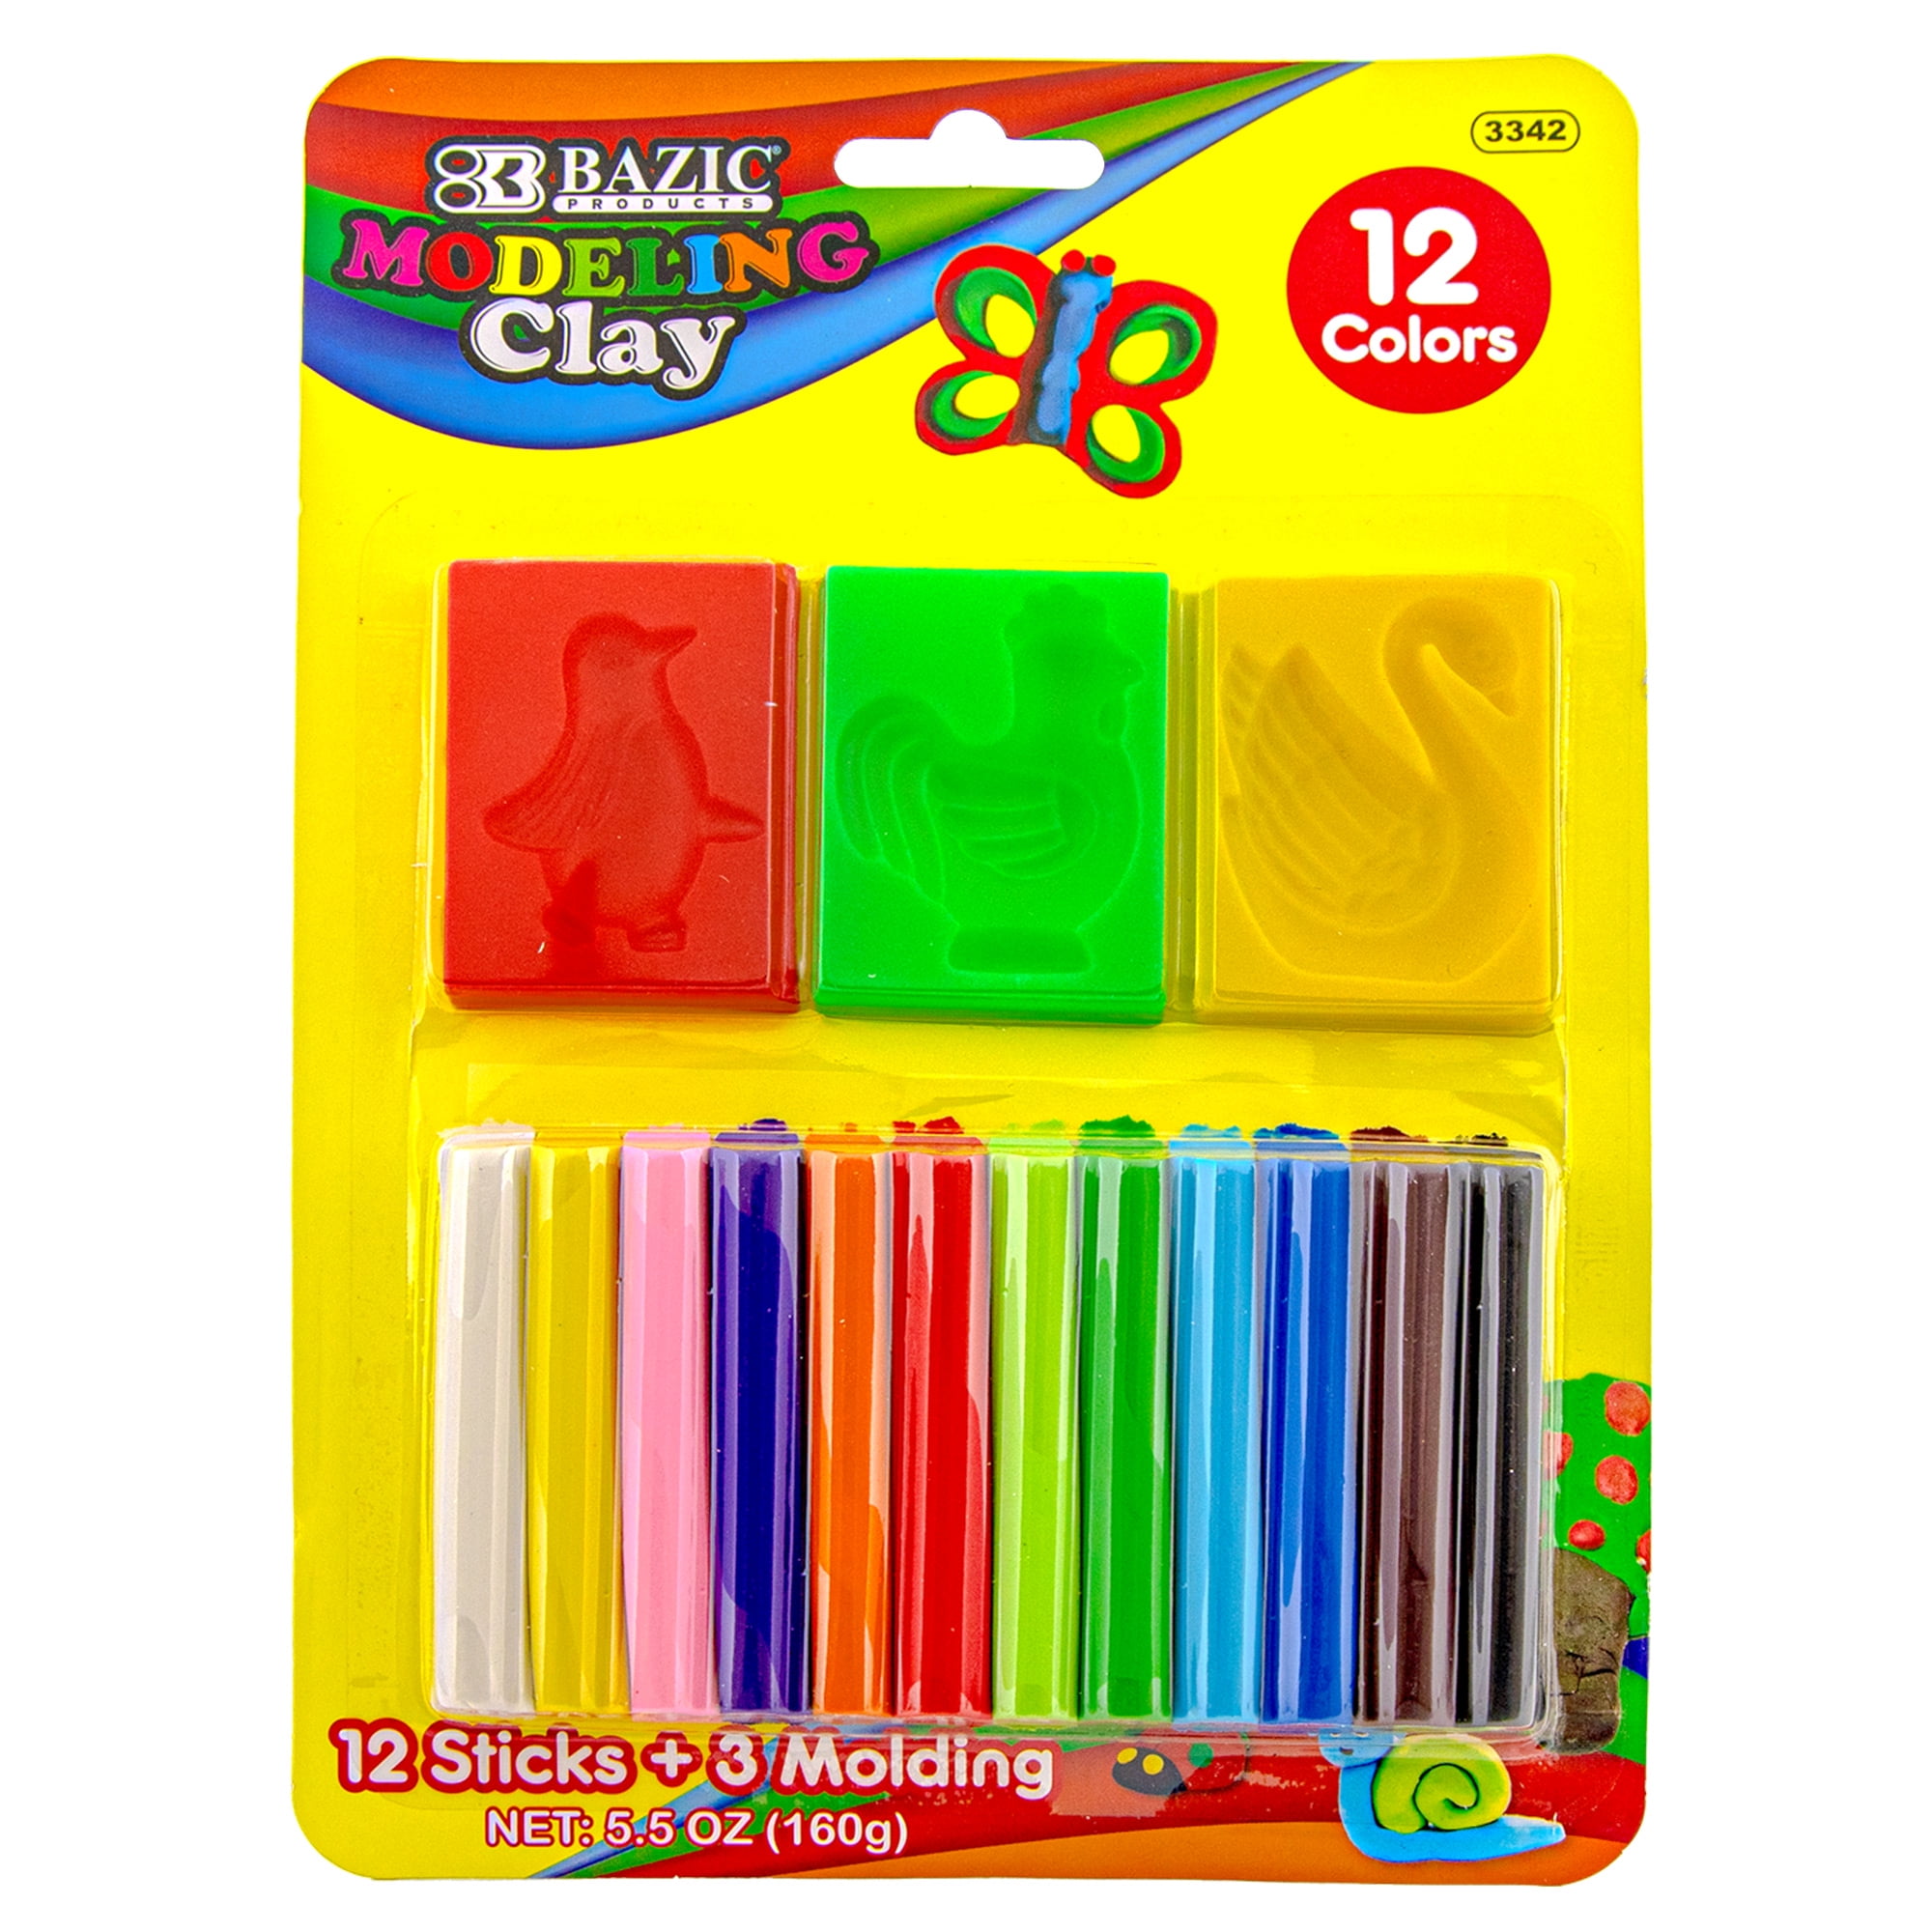 Playkidiz Art Modeling Clay 8 Neon Colors in PVC Clam Shell Box, Beginners  Pack 480 Grams, STEM Educational DIY Molding Set, at Home Crafts for Kids 